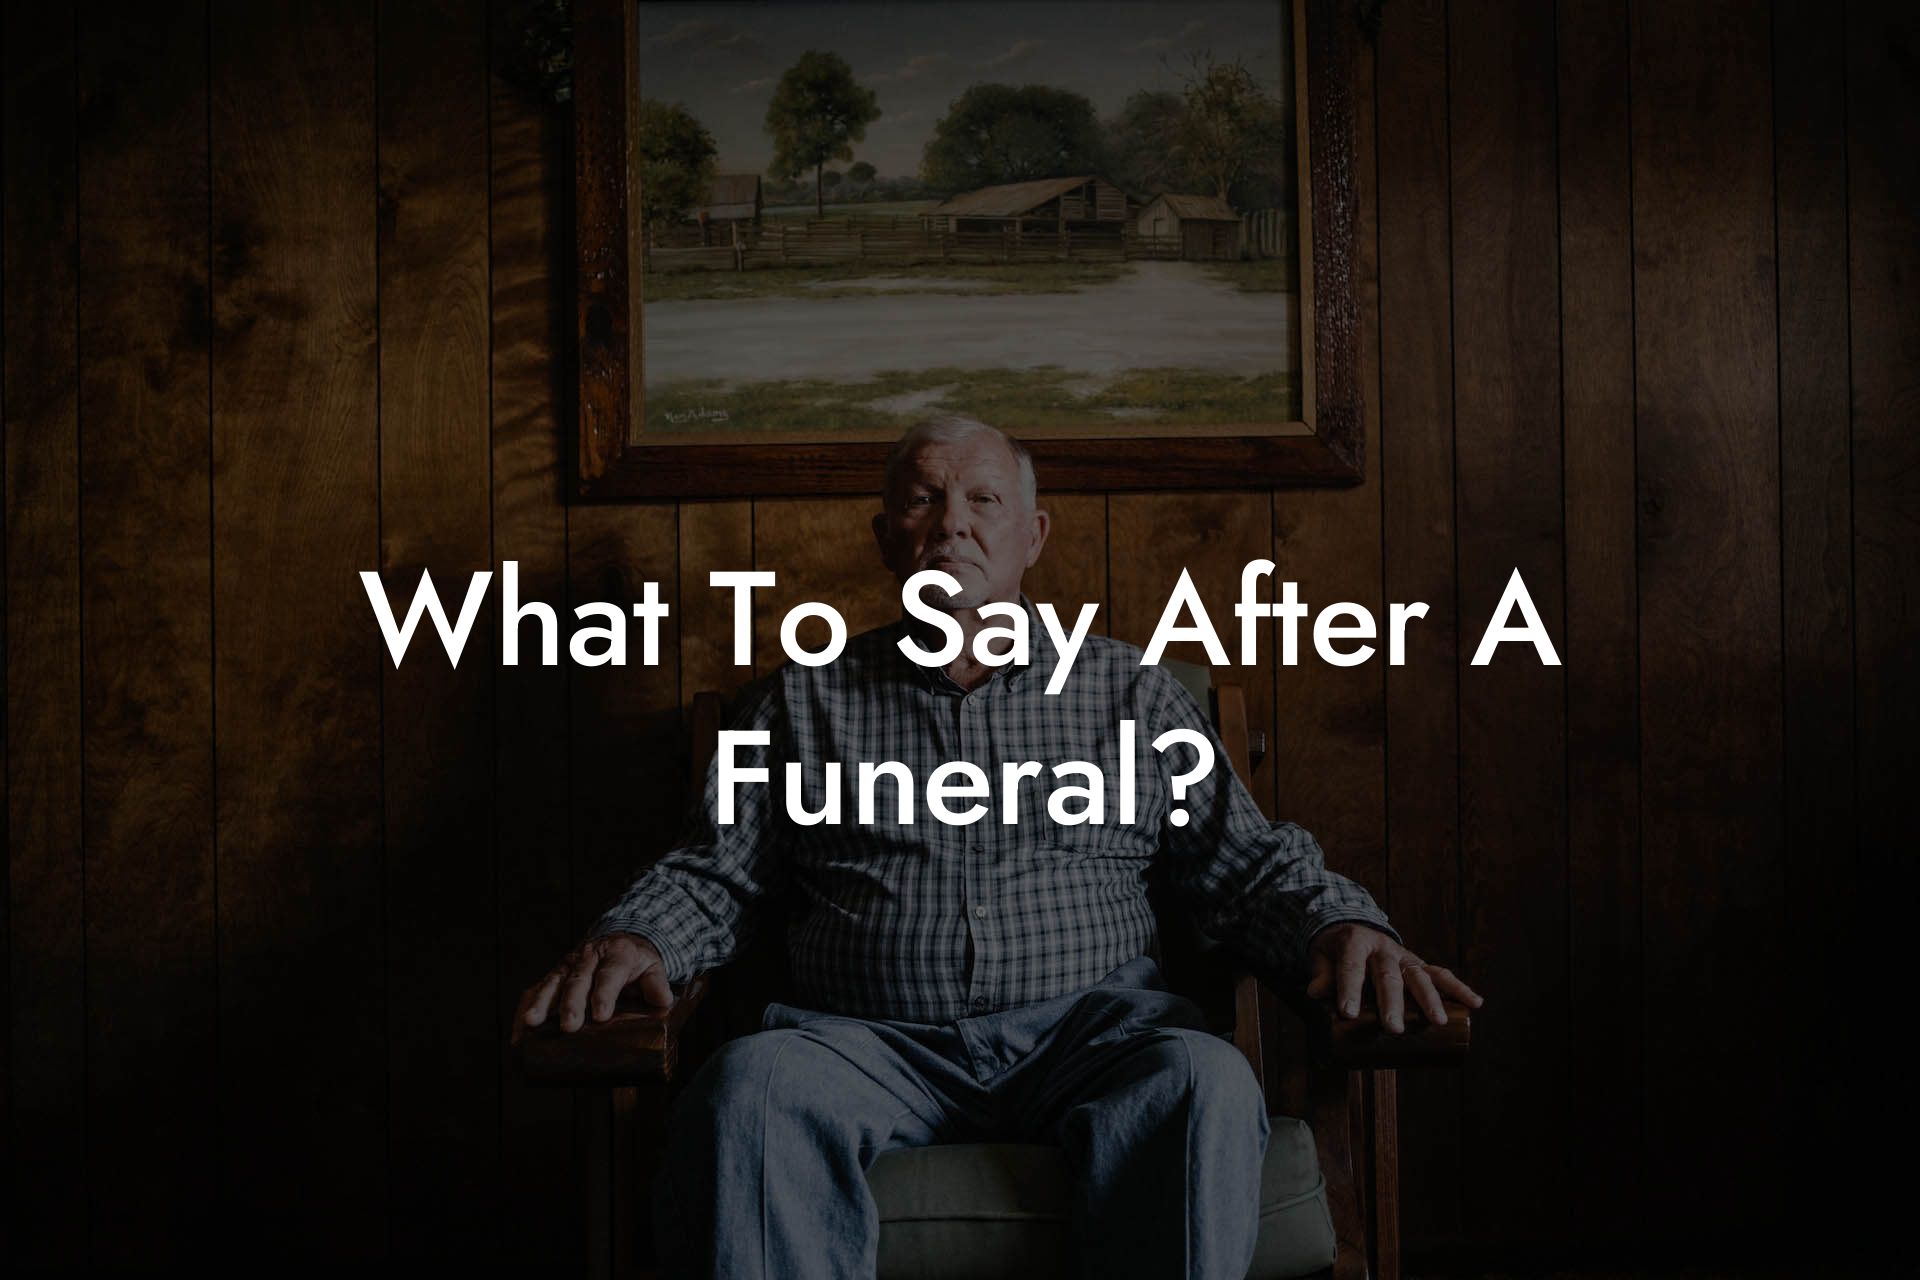 What To Say After A Funeral?